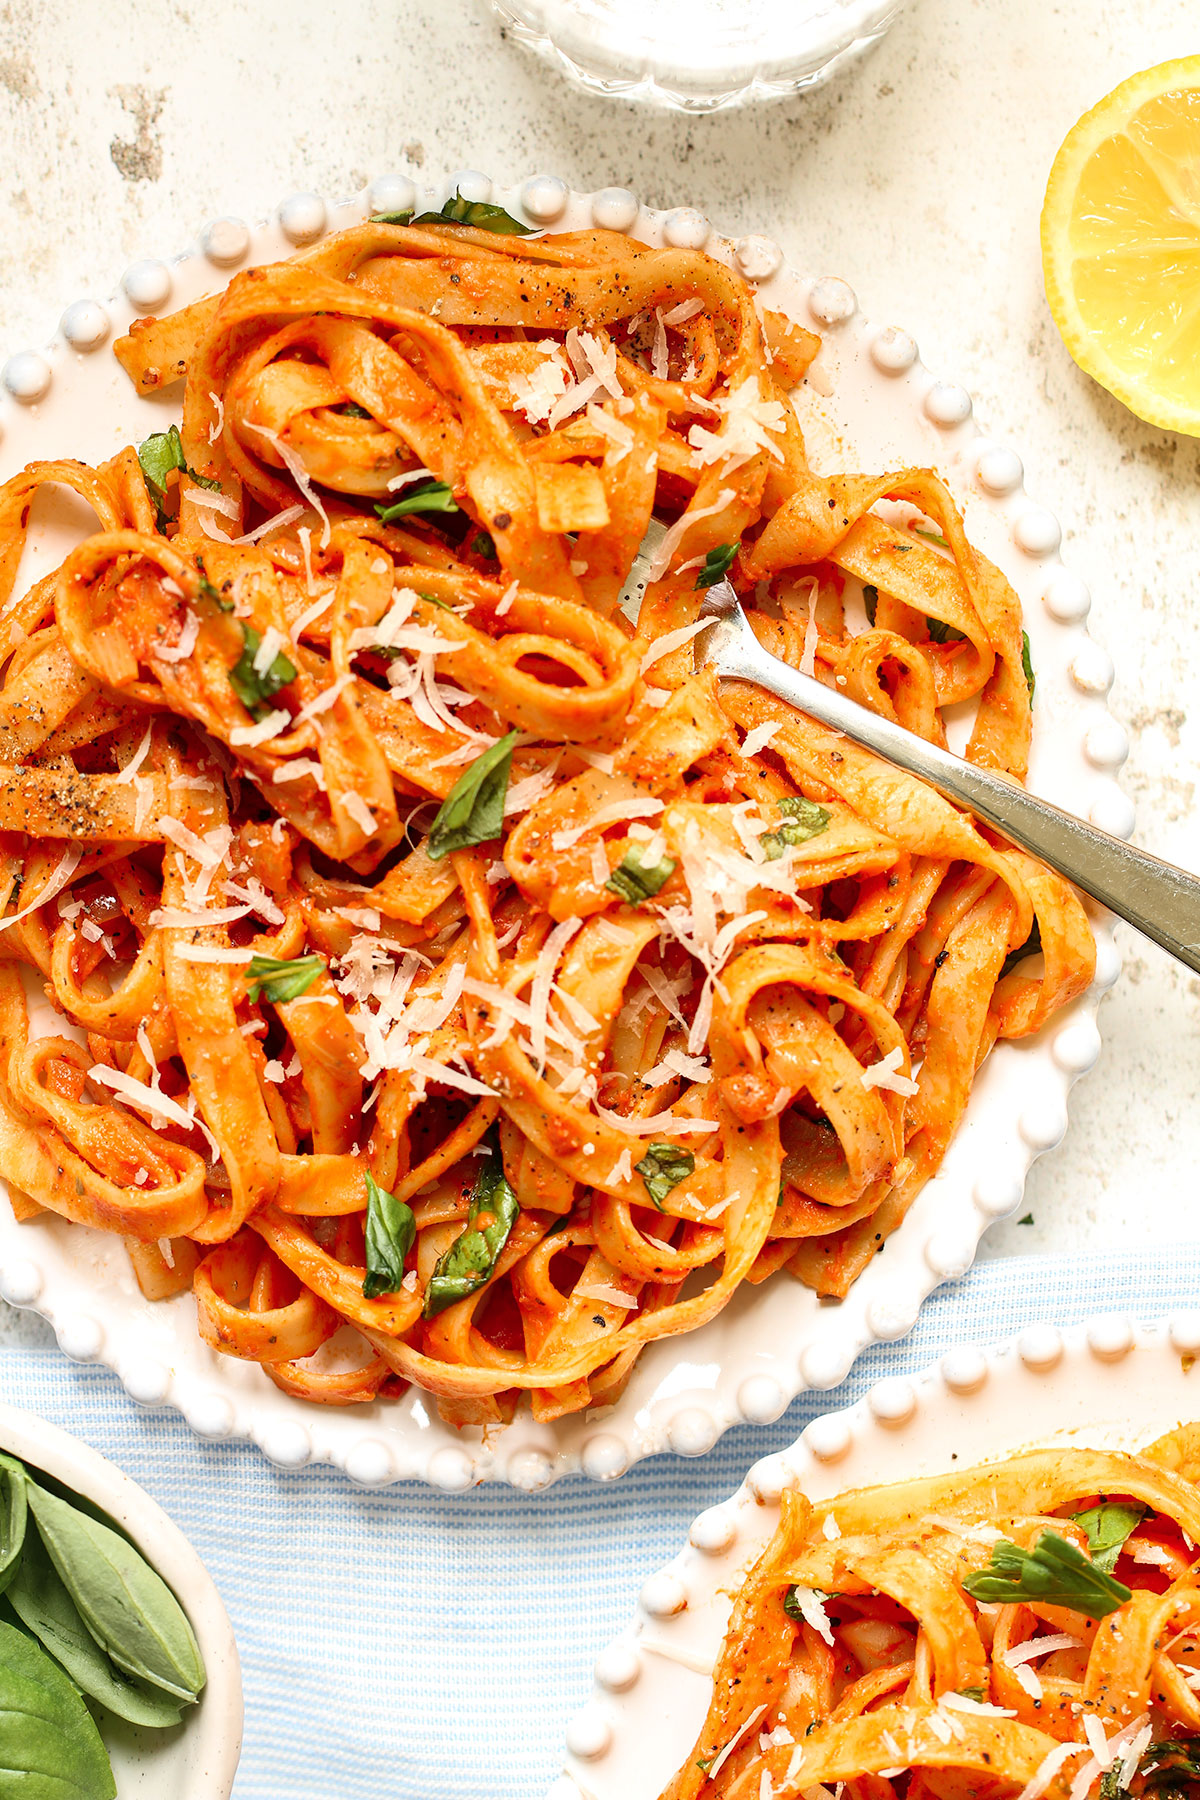 Two bowls of Mascarpone Tomato Pasta on a white background with a fork and sides of basil leaves and half a lemon.